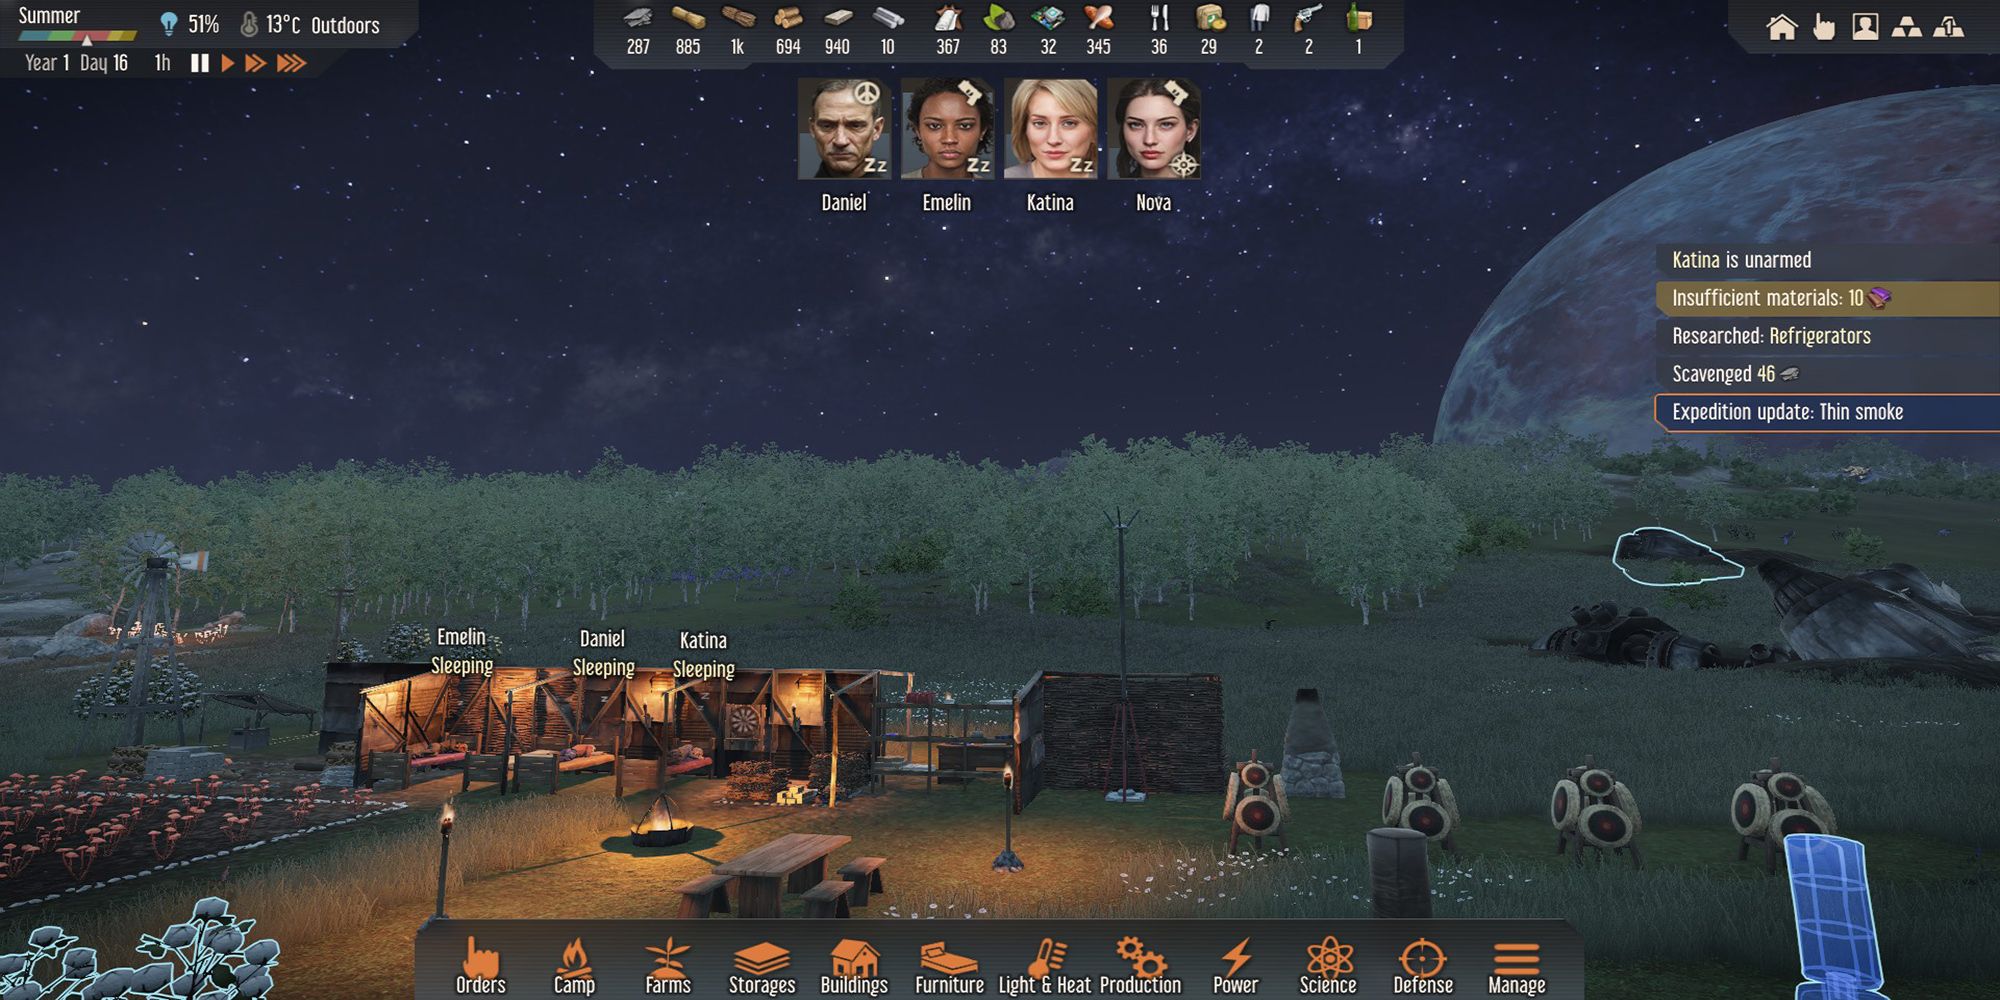 The game speed is paused while survivors sleep in Stranded: Alien Dawn.